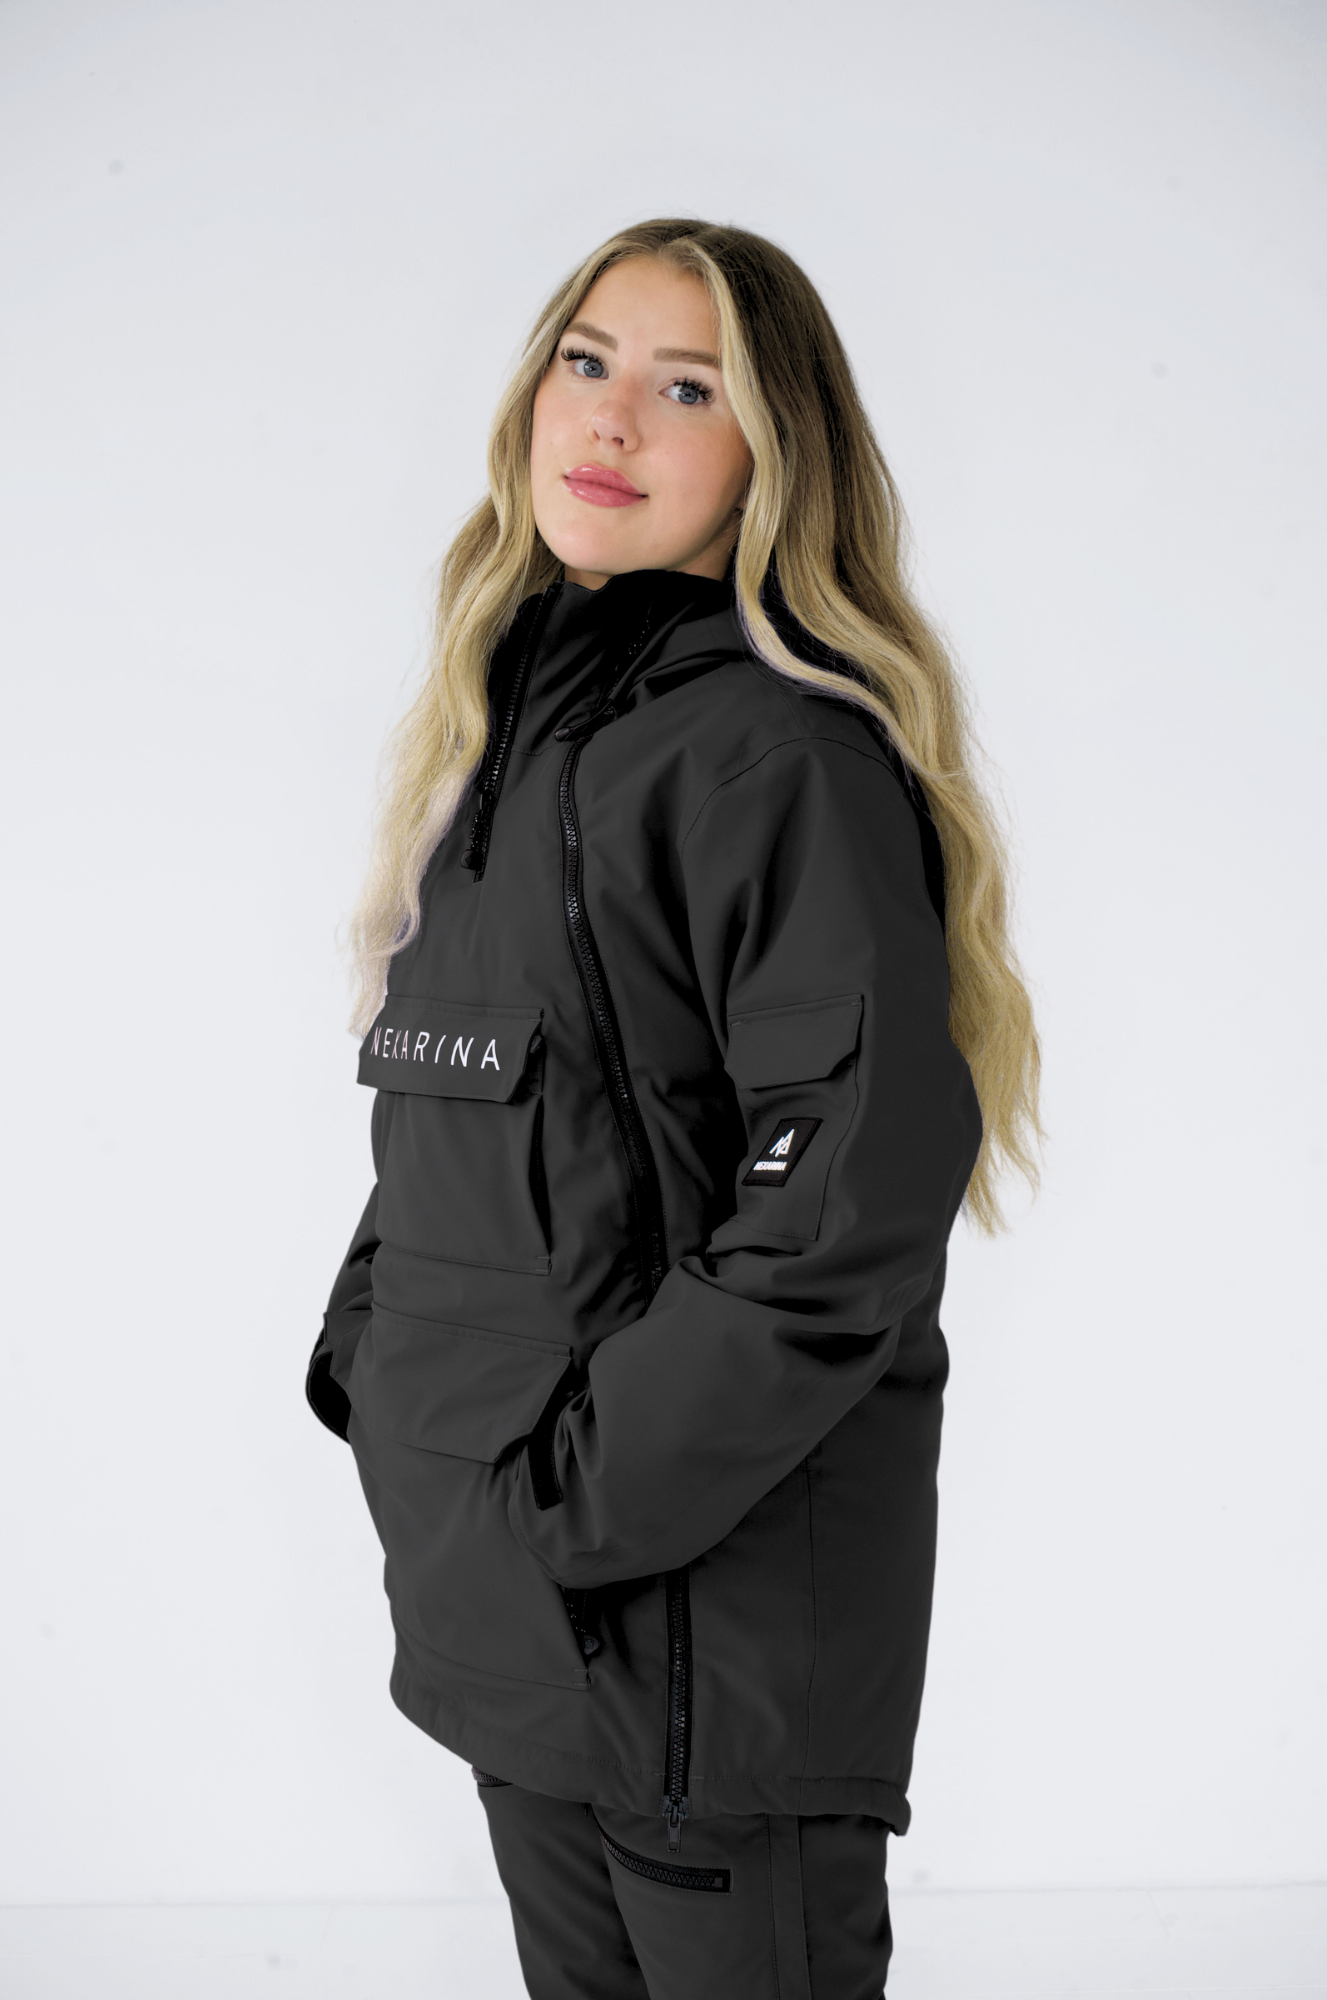 Front view of a woman wearing a black Nexarina snowboard jacket, looking towards the camera, against a white backdrop